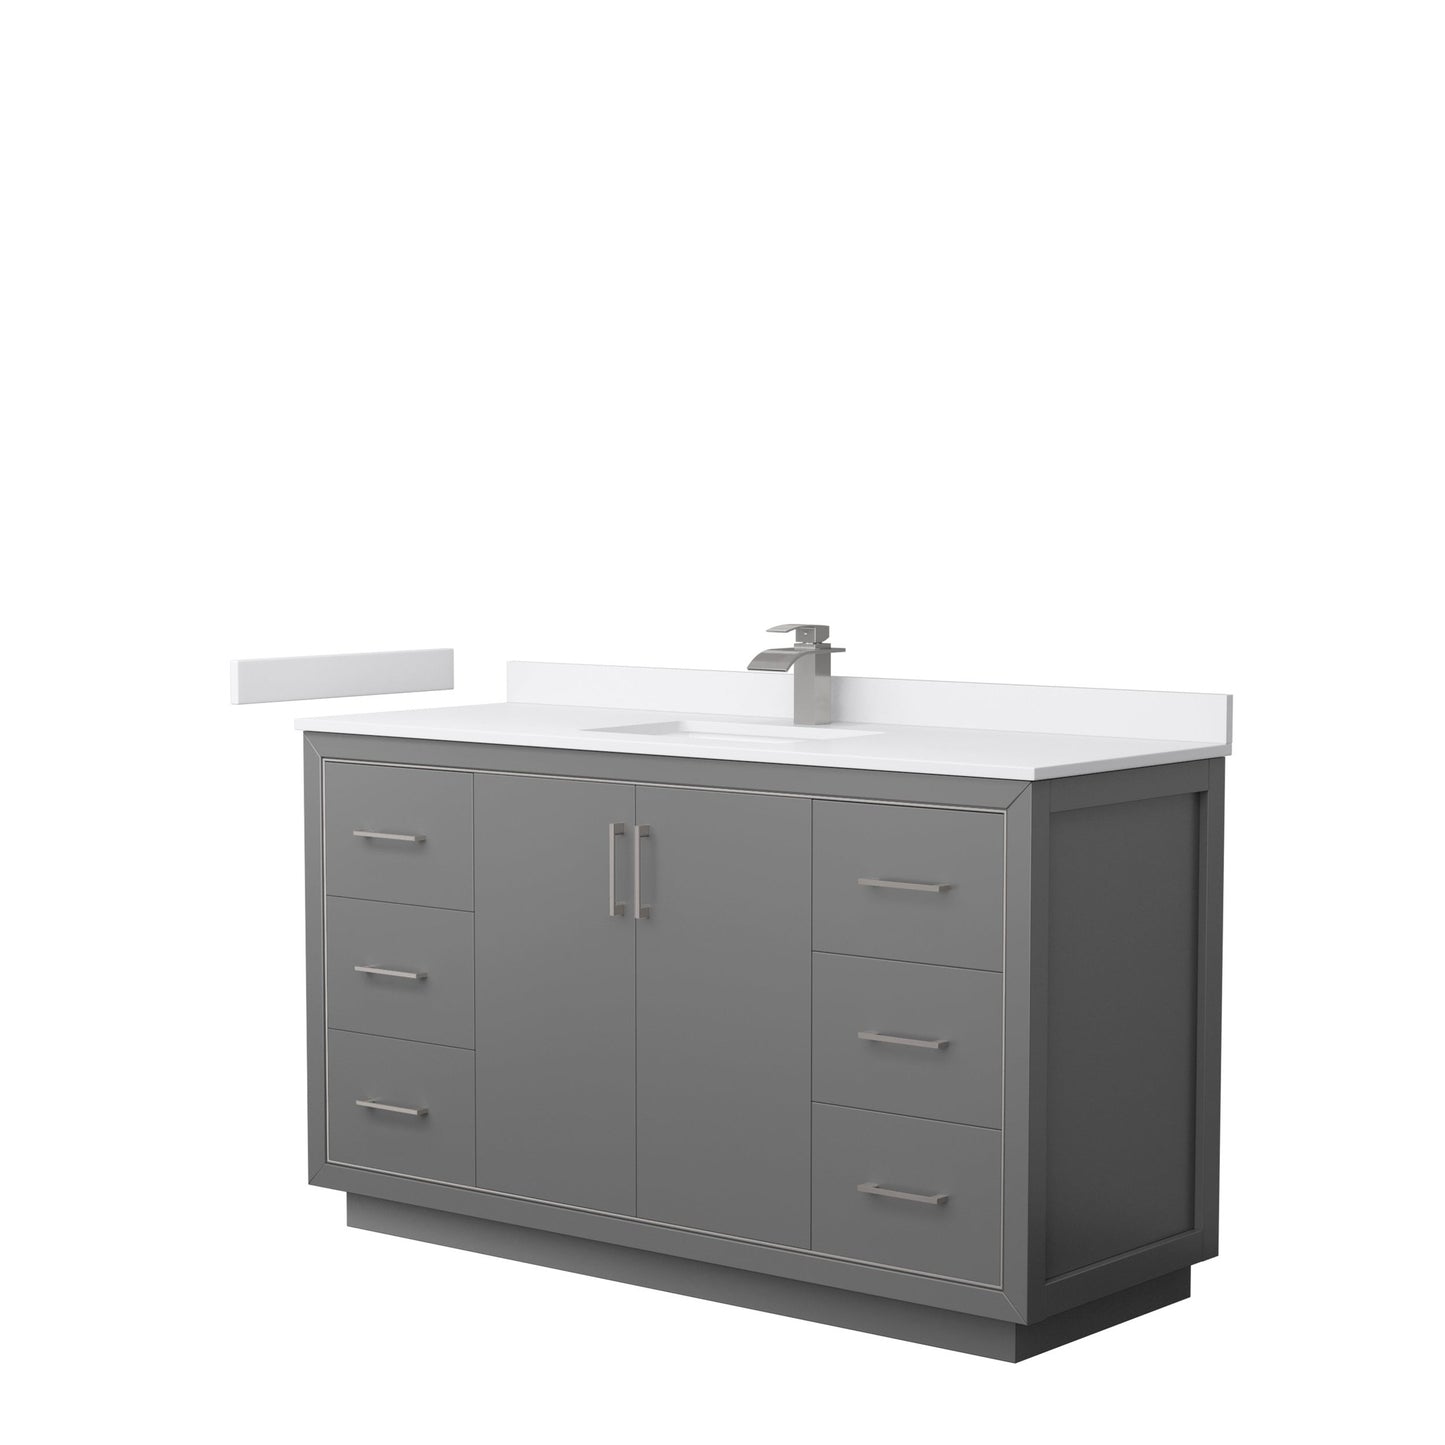 Wyndham Collection Icon 60" Single Bathroom Vanity in Dark Gray, White Cultured Marble Countertop, Undermount Square Sink, Brushed Nickel Trim